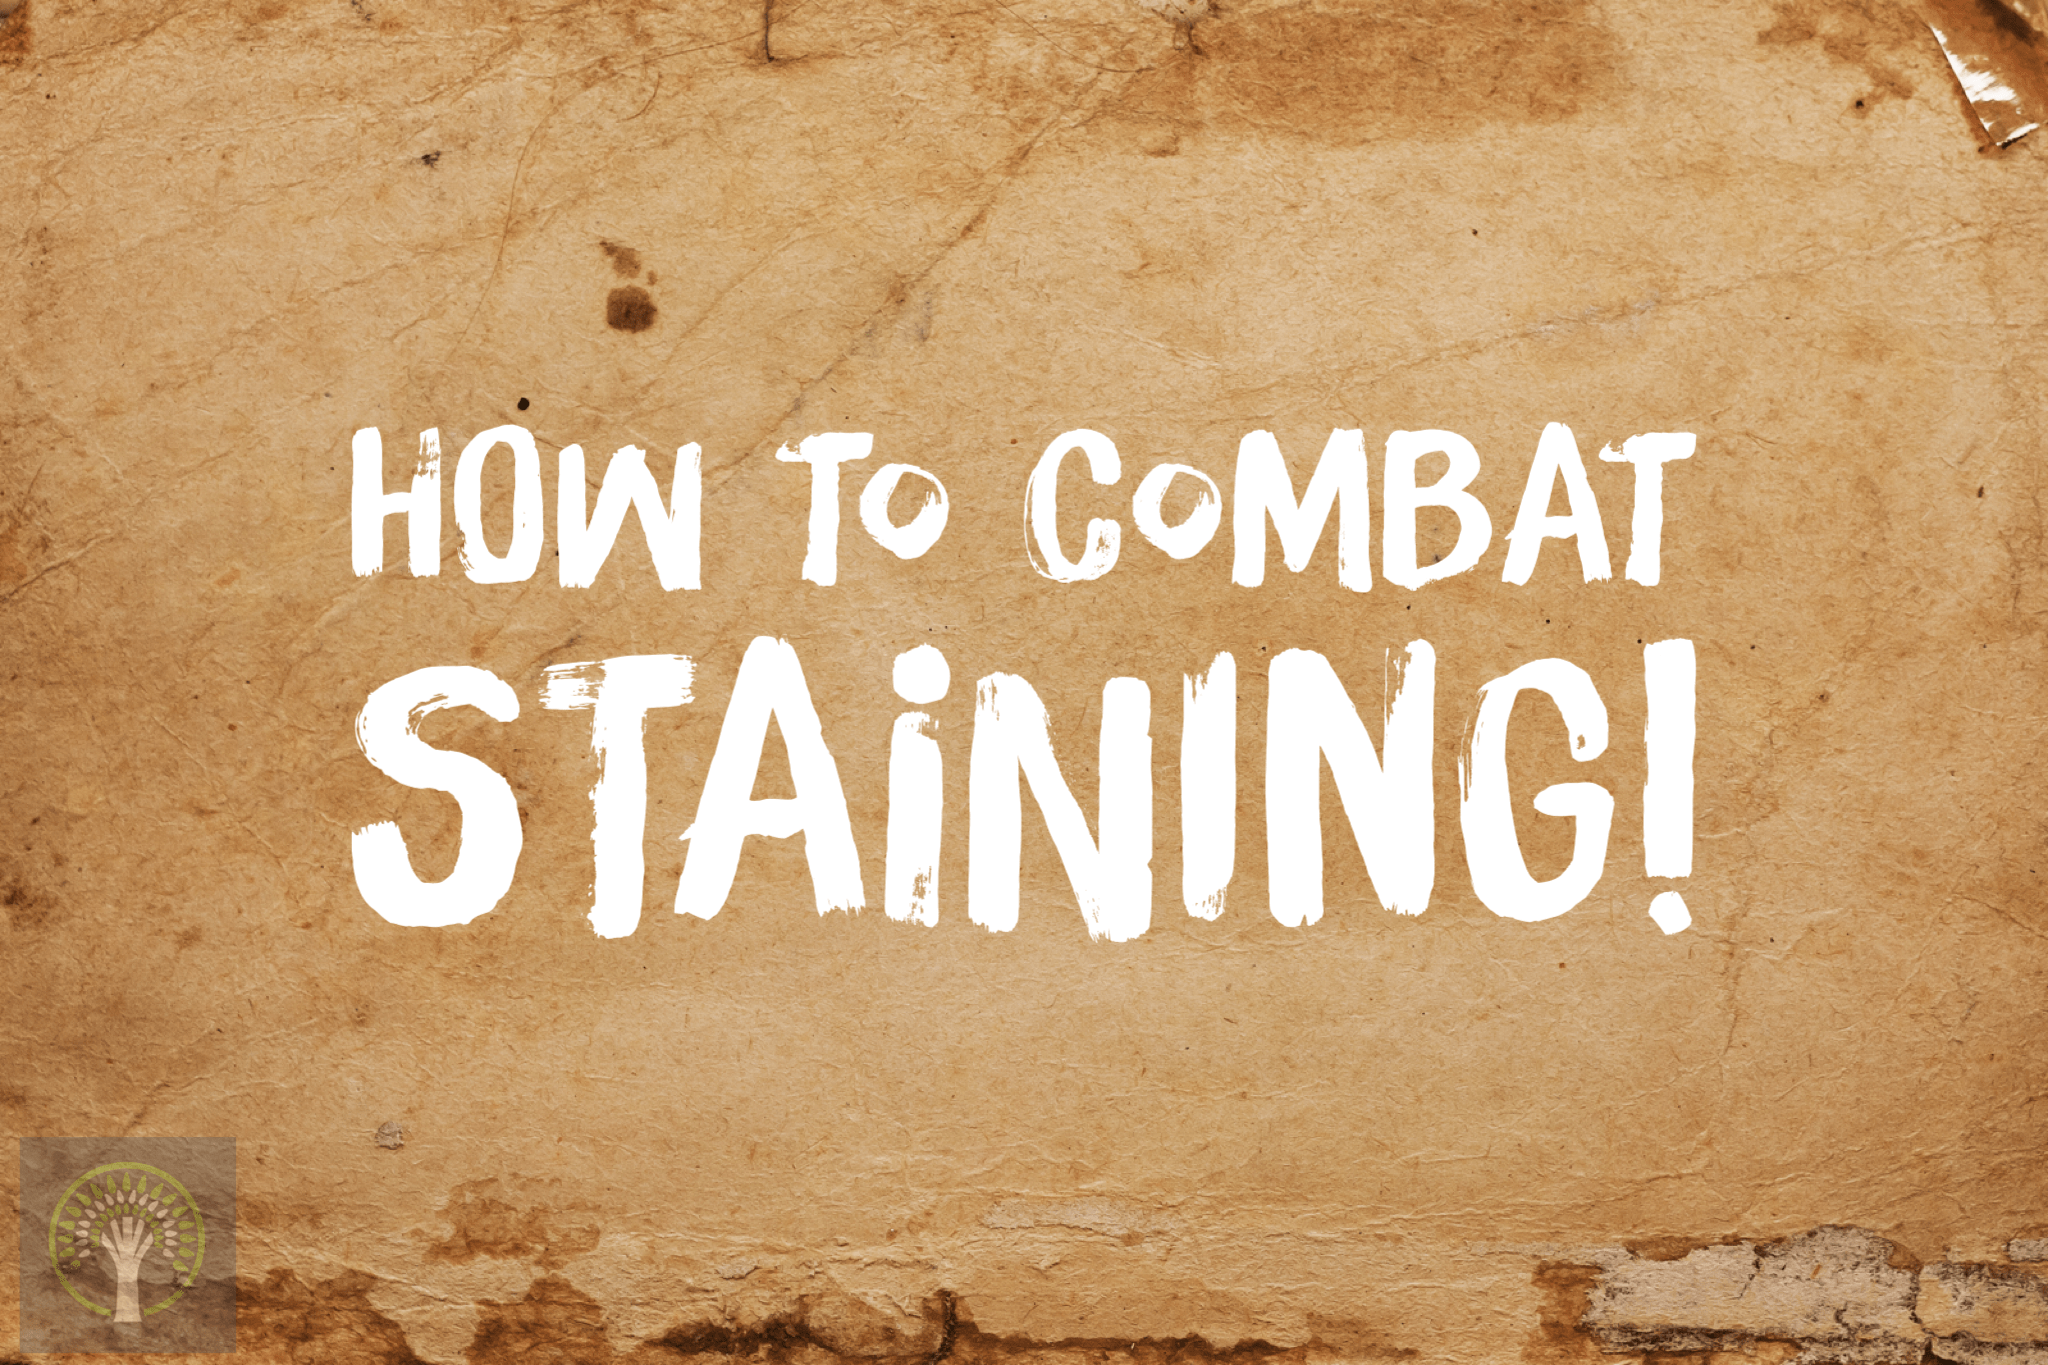 How To Combat Staining!